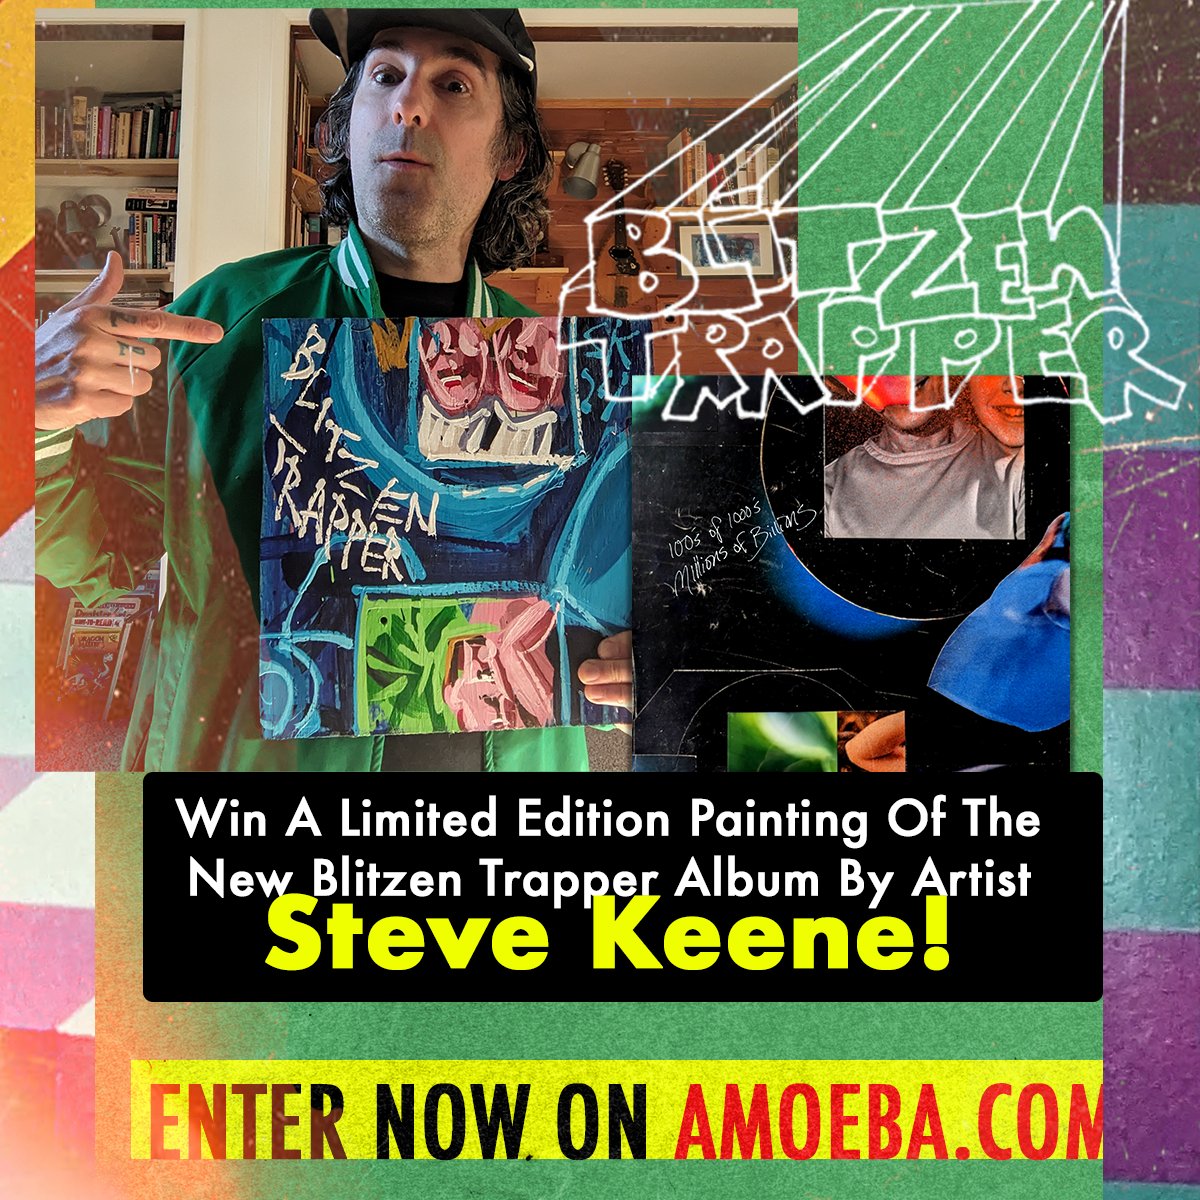 Legendary artist Steve Keene has hand-painted some limited edition art pieces of the cover of @BlitzenTrapper's new album '100's of 1000's, Millions of Billions' and we’re excited to give away one of these very special paintings! 🎨 Enter to win here: bit.ly/3WFb4ql